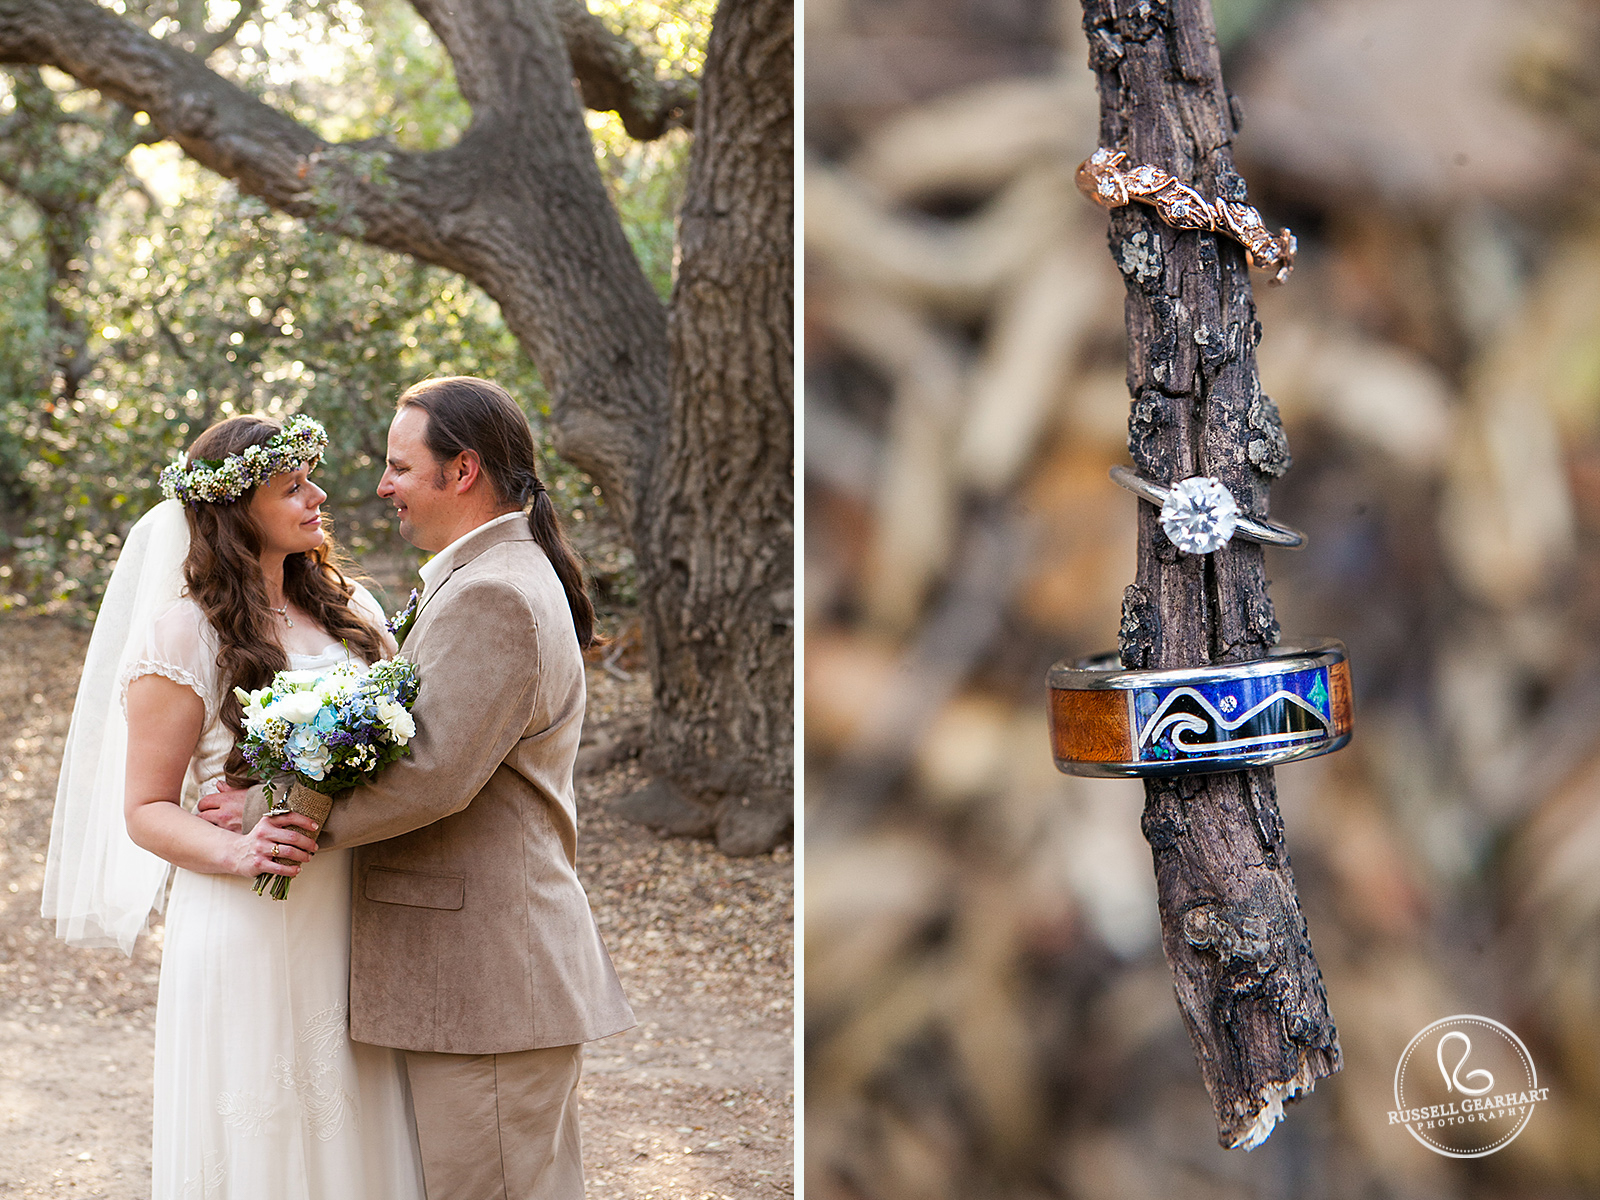 Nature Inspired Wedding Rings – Oak Canyon Wedding  – Russell Gearhart Photography – www.gearhartphoto.com